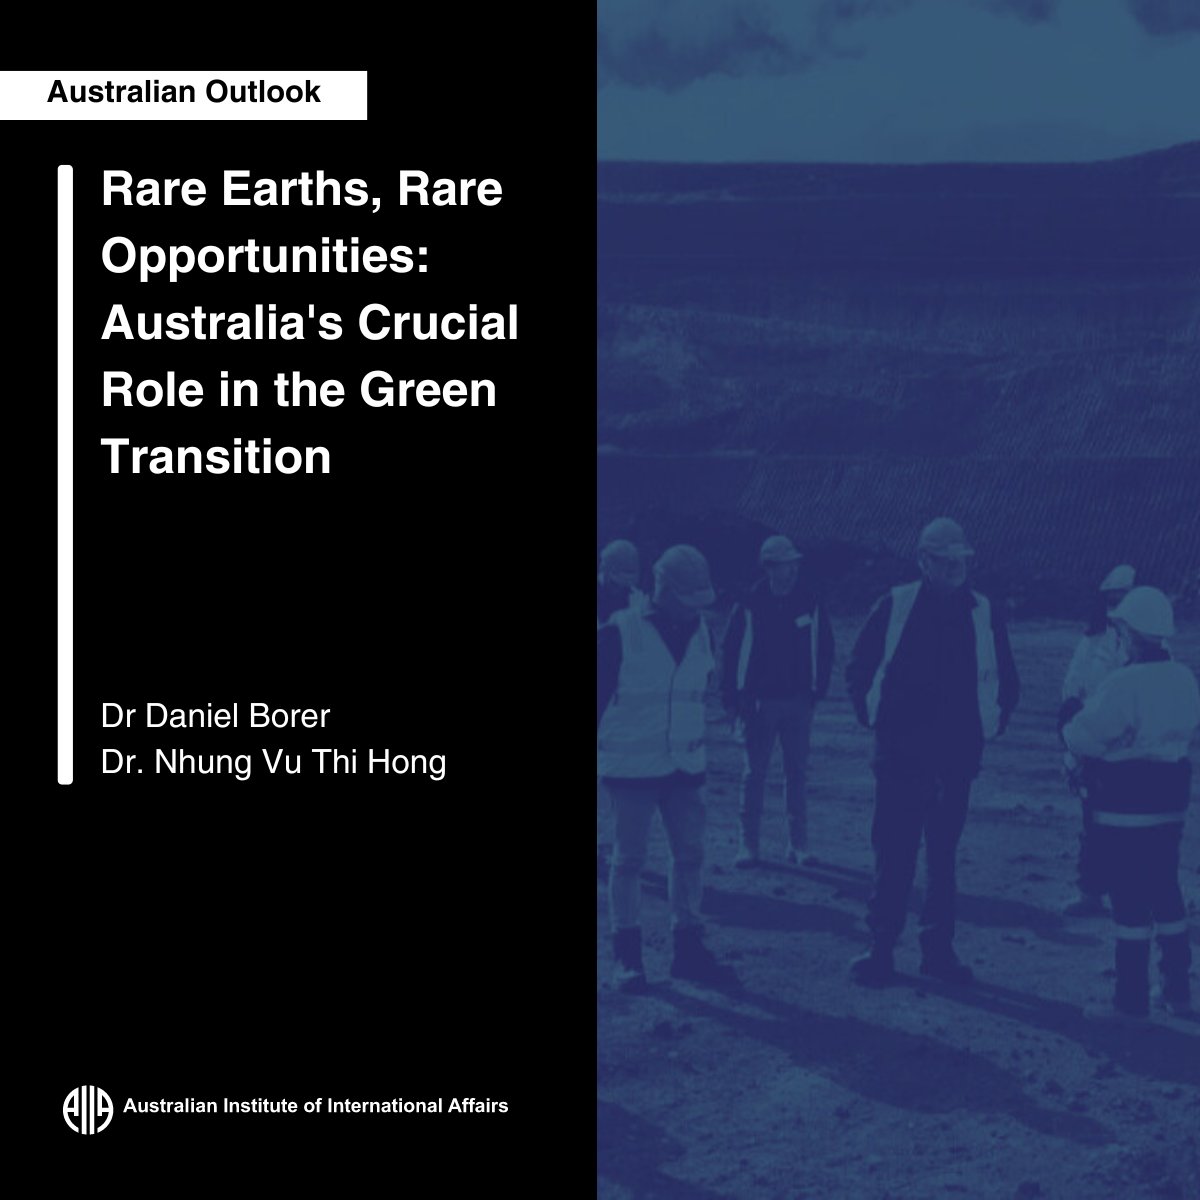 “Rare Earth Elements are becoming increasingly important in the world’s green transition. Australia should become a more proactive contributor,” discussed by Dr Daniel Borer and Dr. Nhung Vu Thi Hong Read more at Australian Outlook👇 ow.ly/tcQM50RhMww